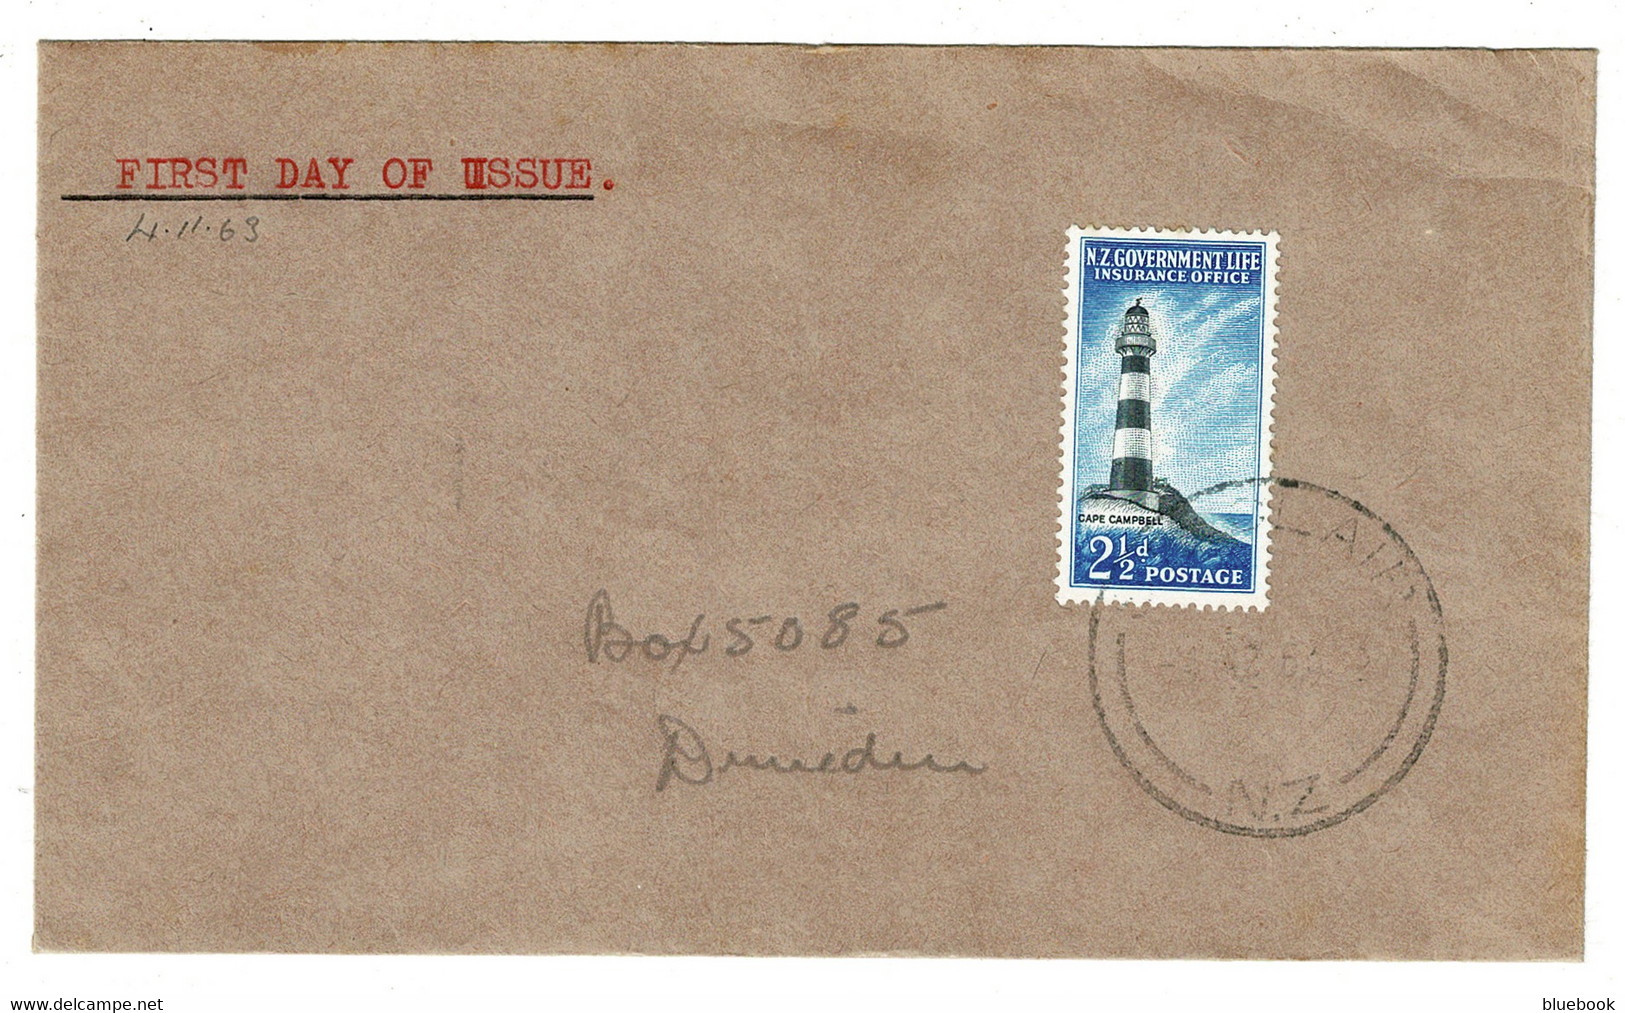 Ref 1553 -  1963 New Zealand FDC First Day Cover - Life Insurance Office SG L45 St Clair Pmk - Lighthouse Stamp - Lettres & Documents